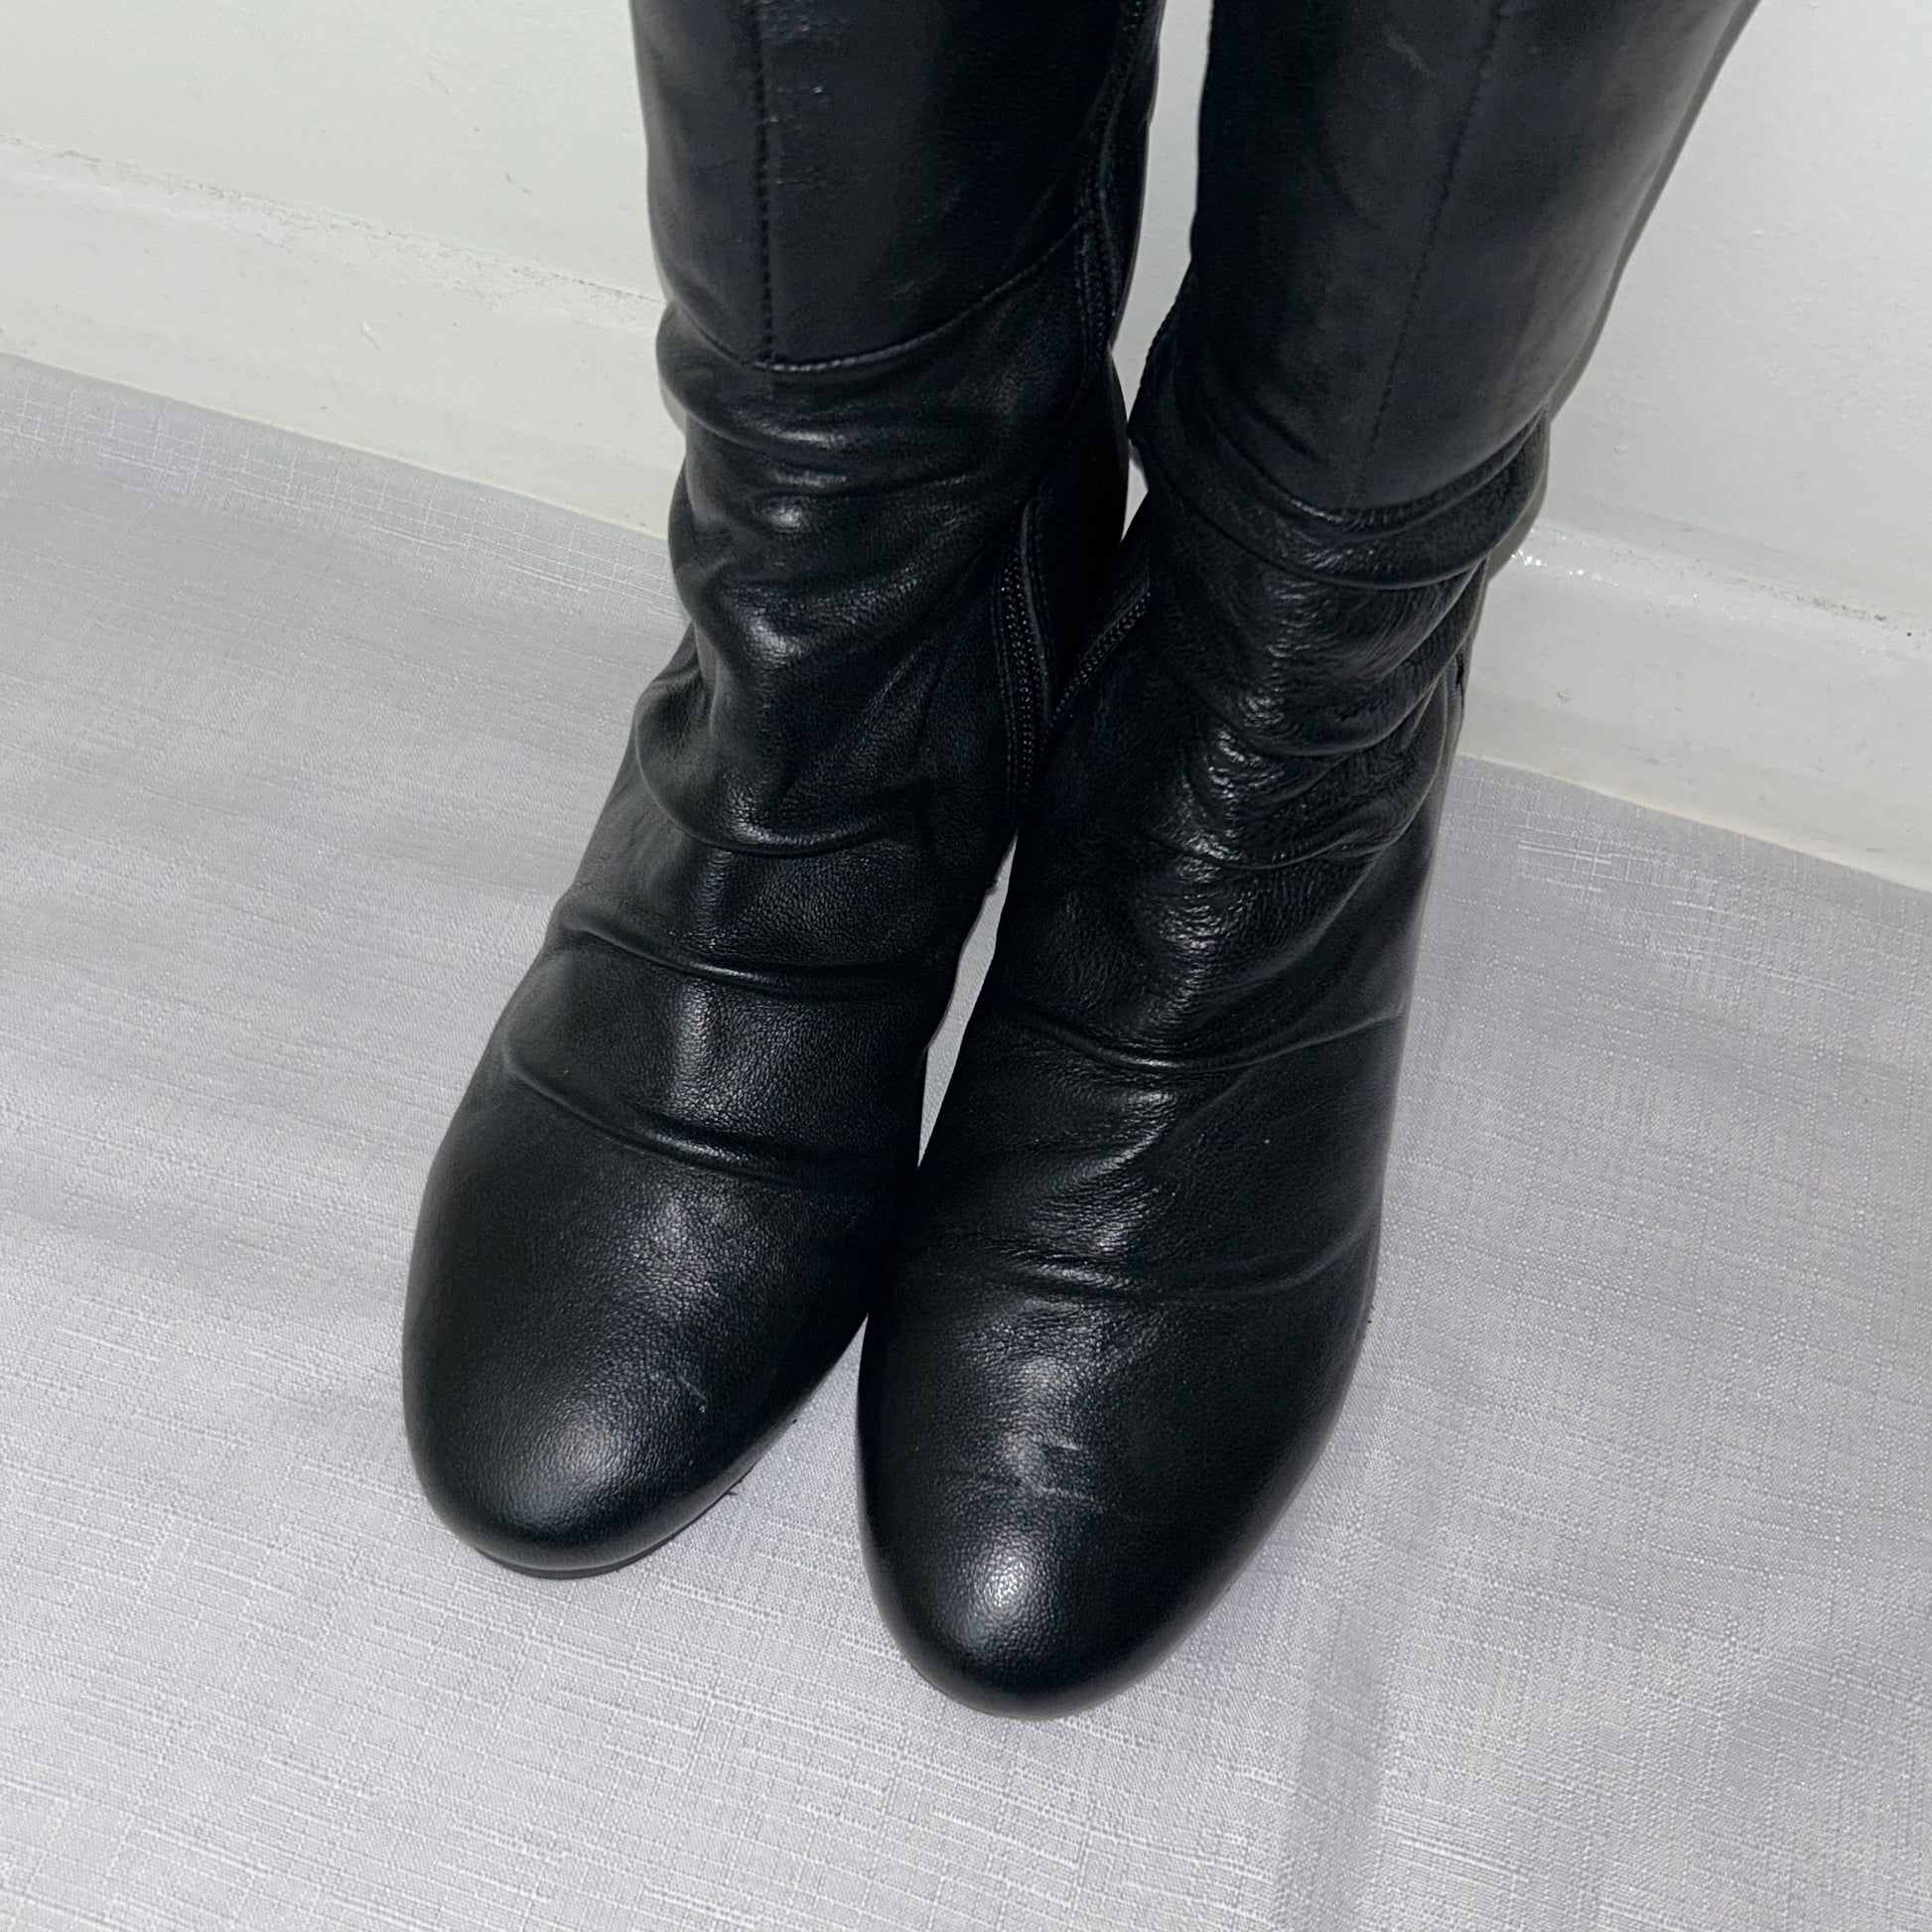 toes of black knee high real leather boots shown on a white background